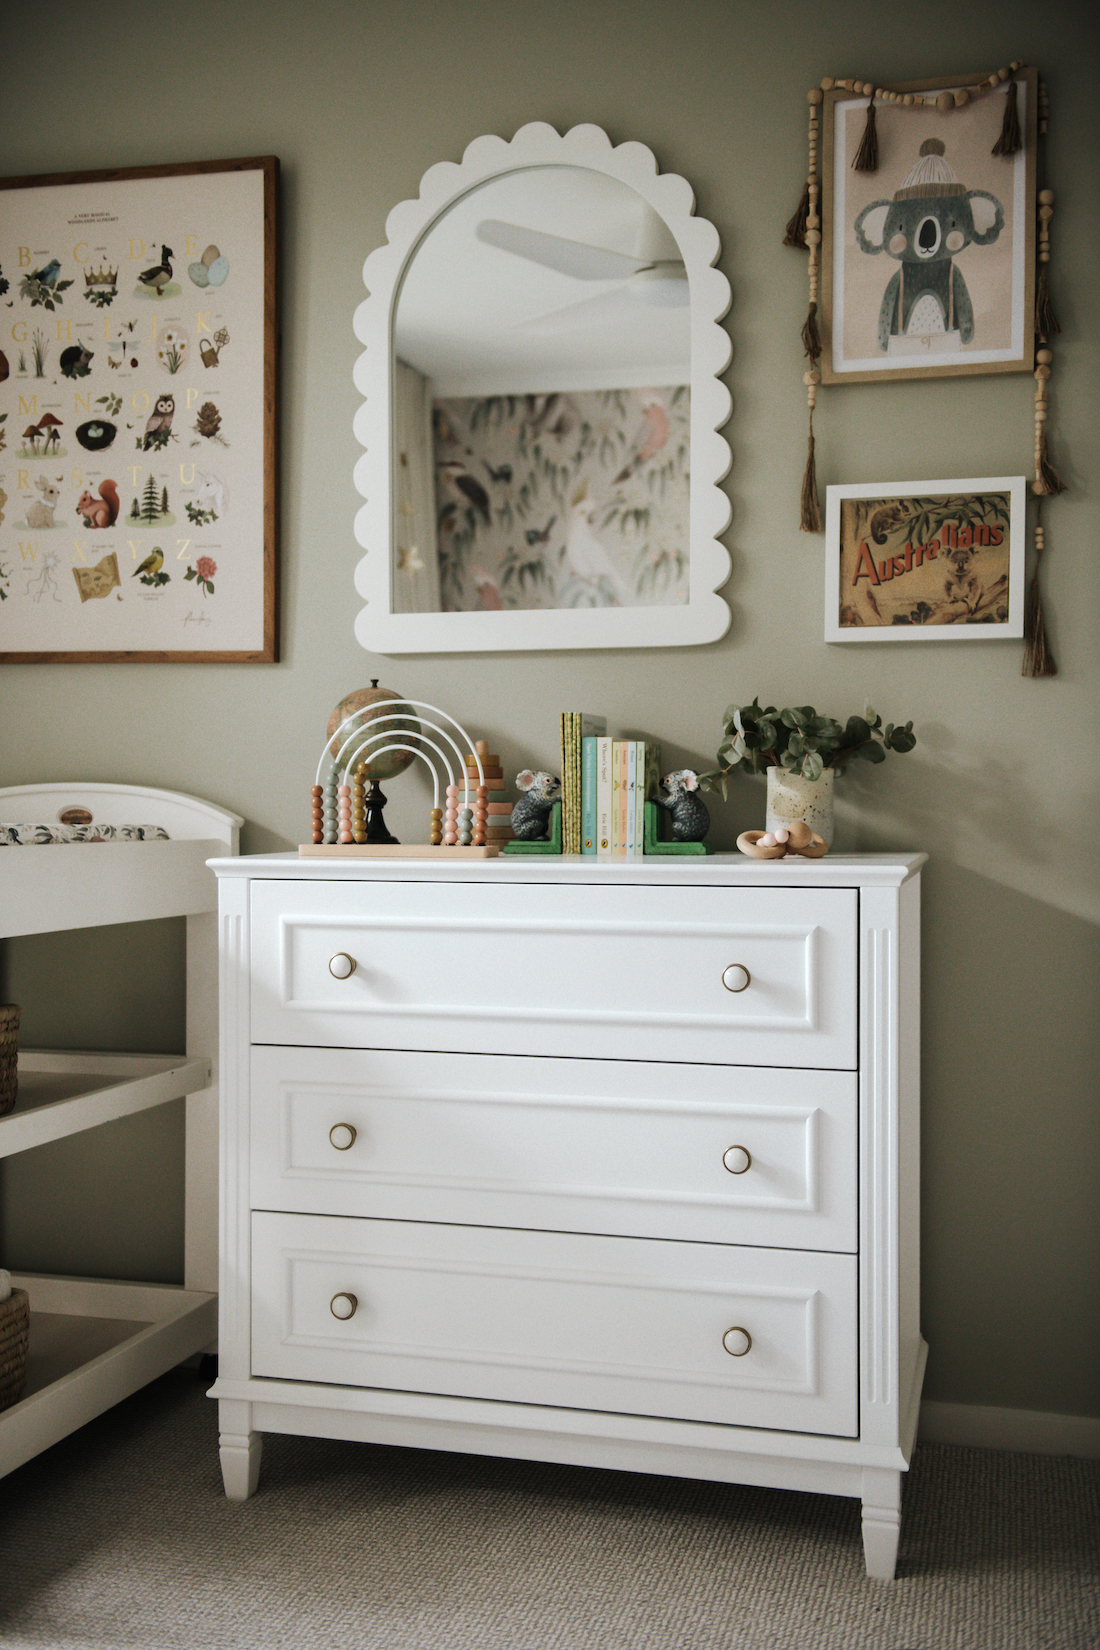 White chest of drawers styled in gender neutral nursery